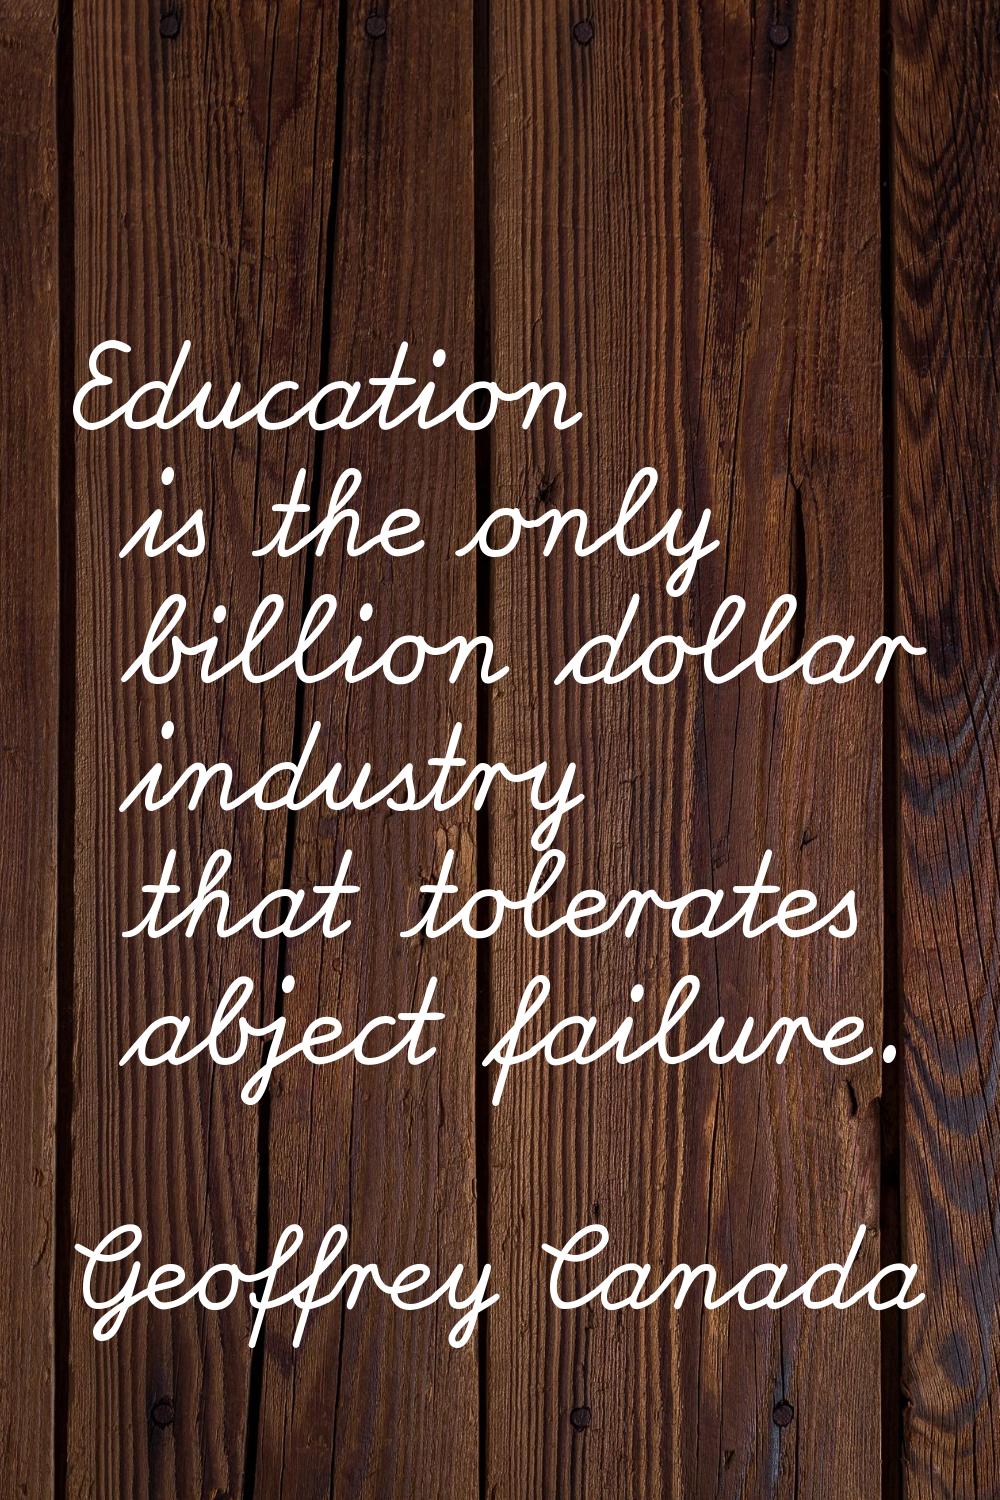 Education is the only billion dollar industry that tolerates abject failure.